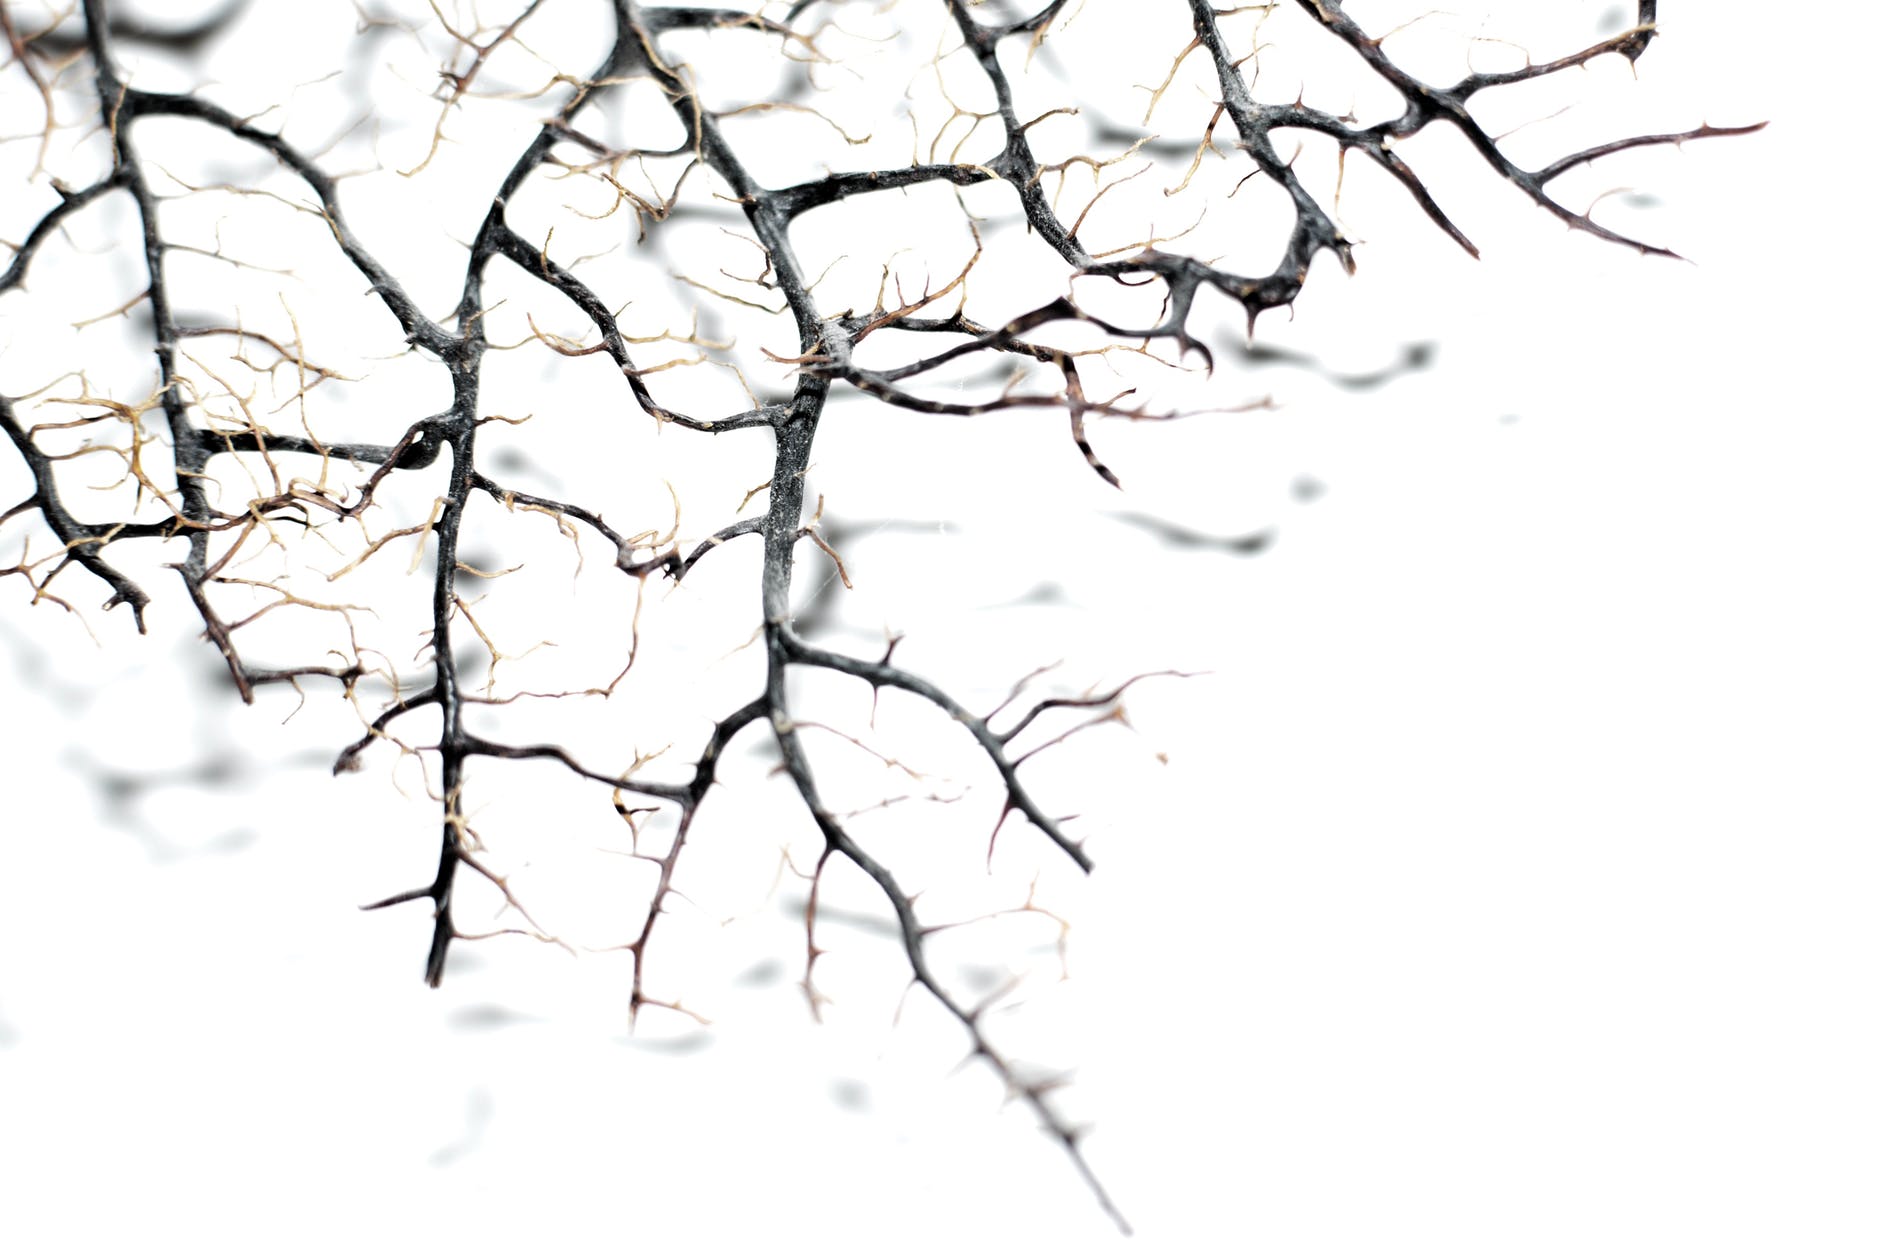 leafless tree branches with thin needles